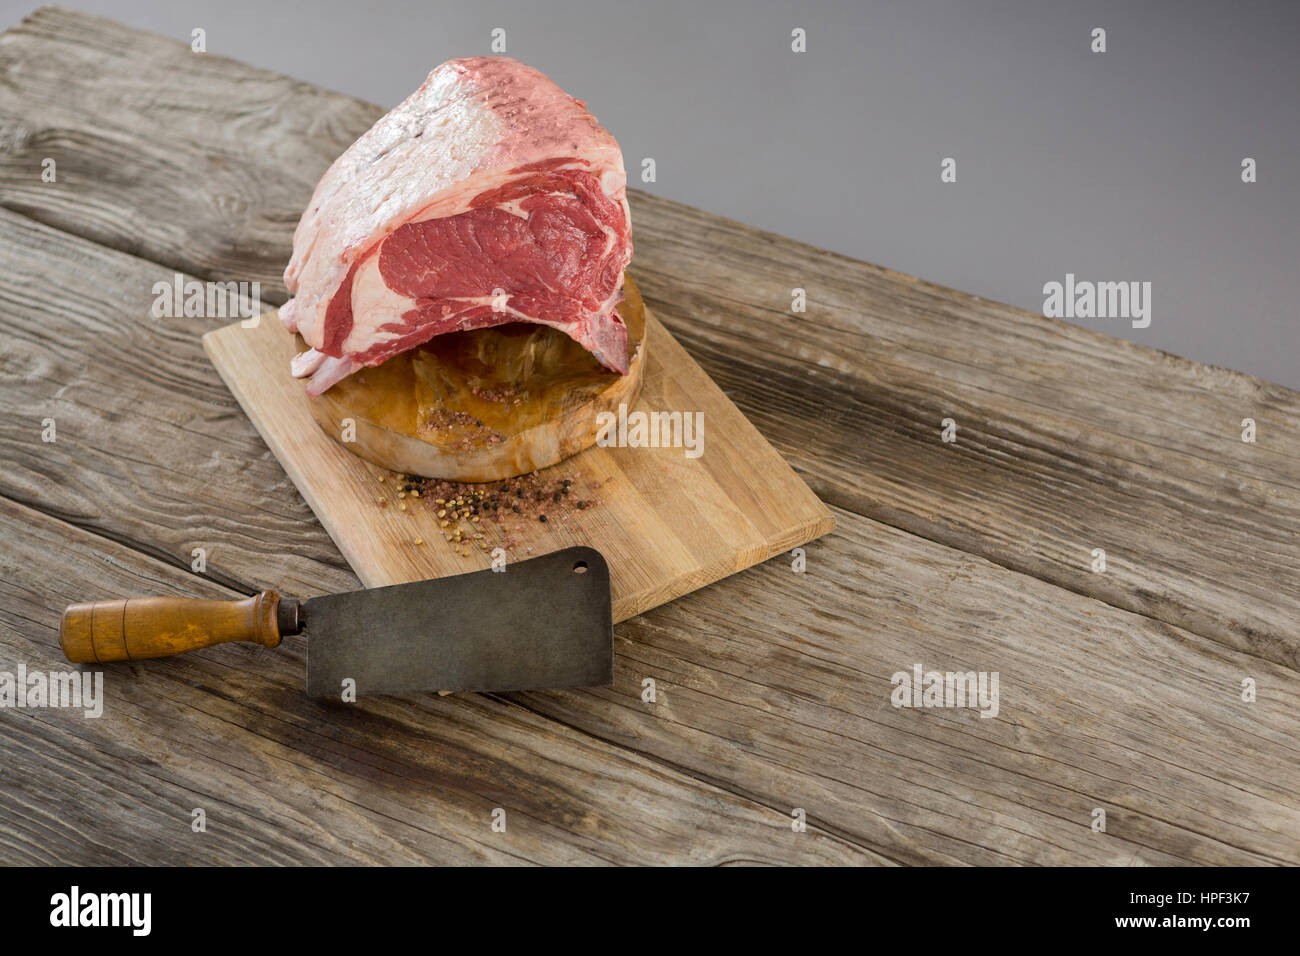 https://c8.alamy.com/comp/HPF3K7/raw-beef-ribs-rack-and-knife-on-wooden-tray-against-wooden-background-HPF3K7.jpg